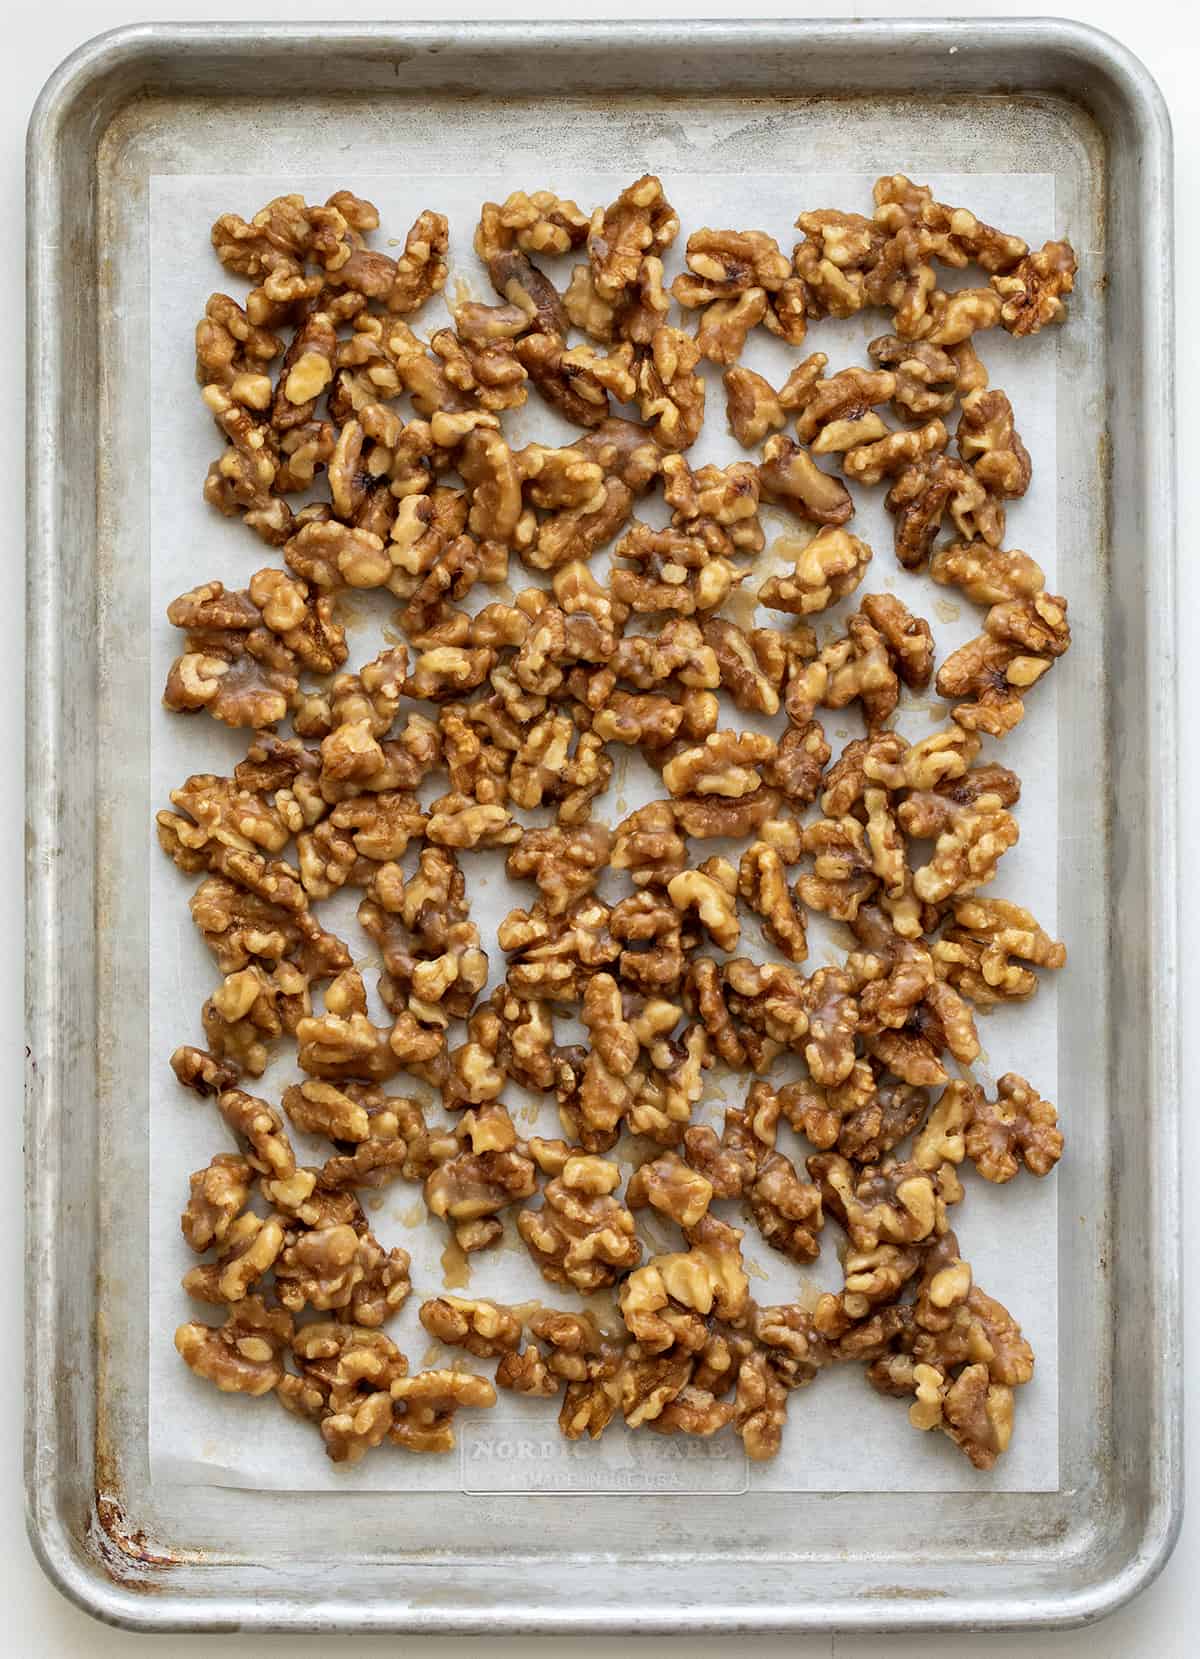 Pan of Candied Walnuts Before They are Baked.